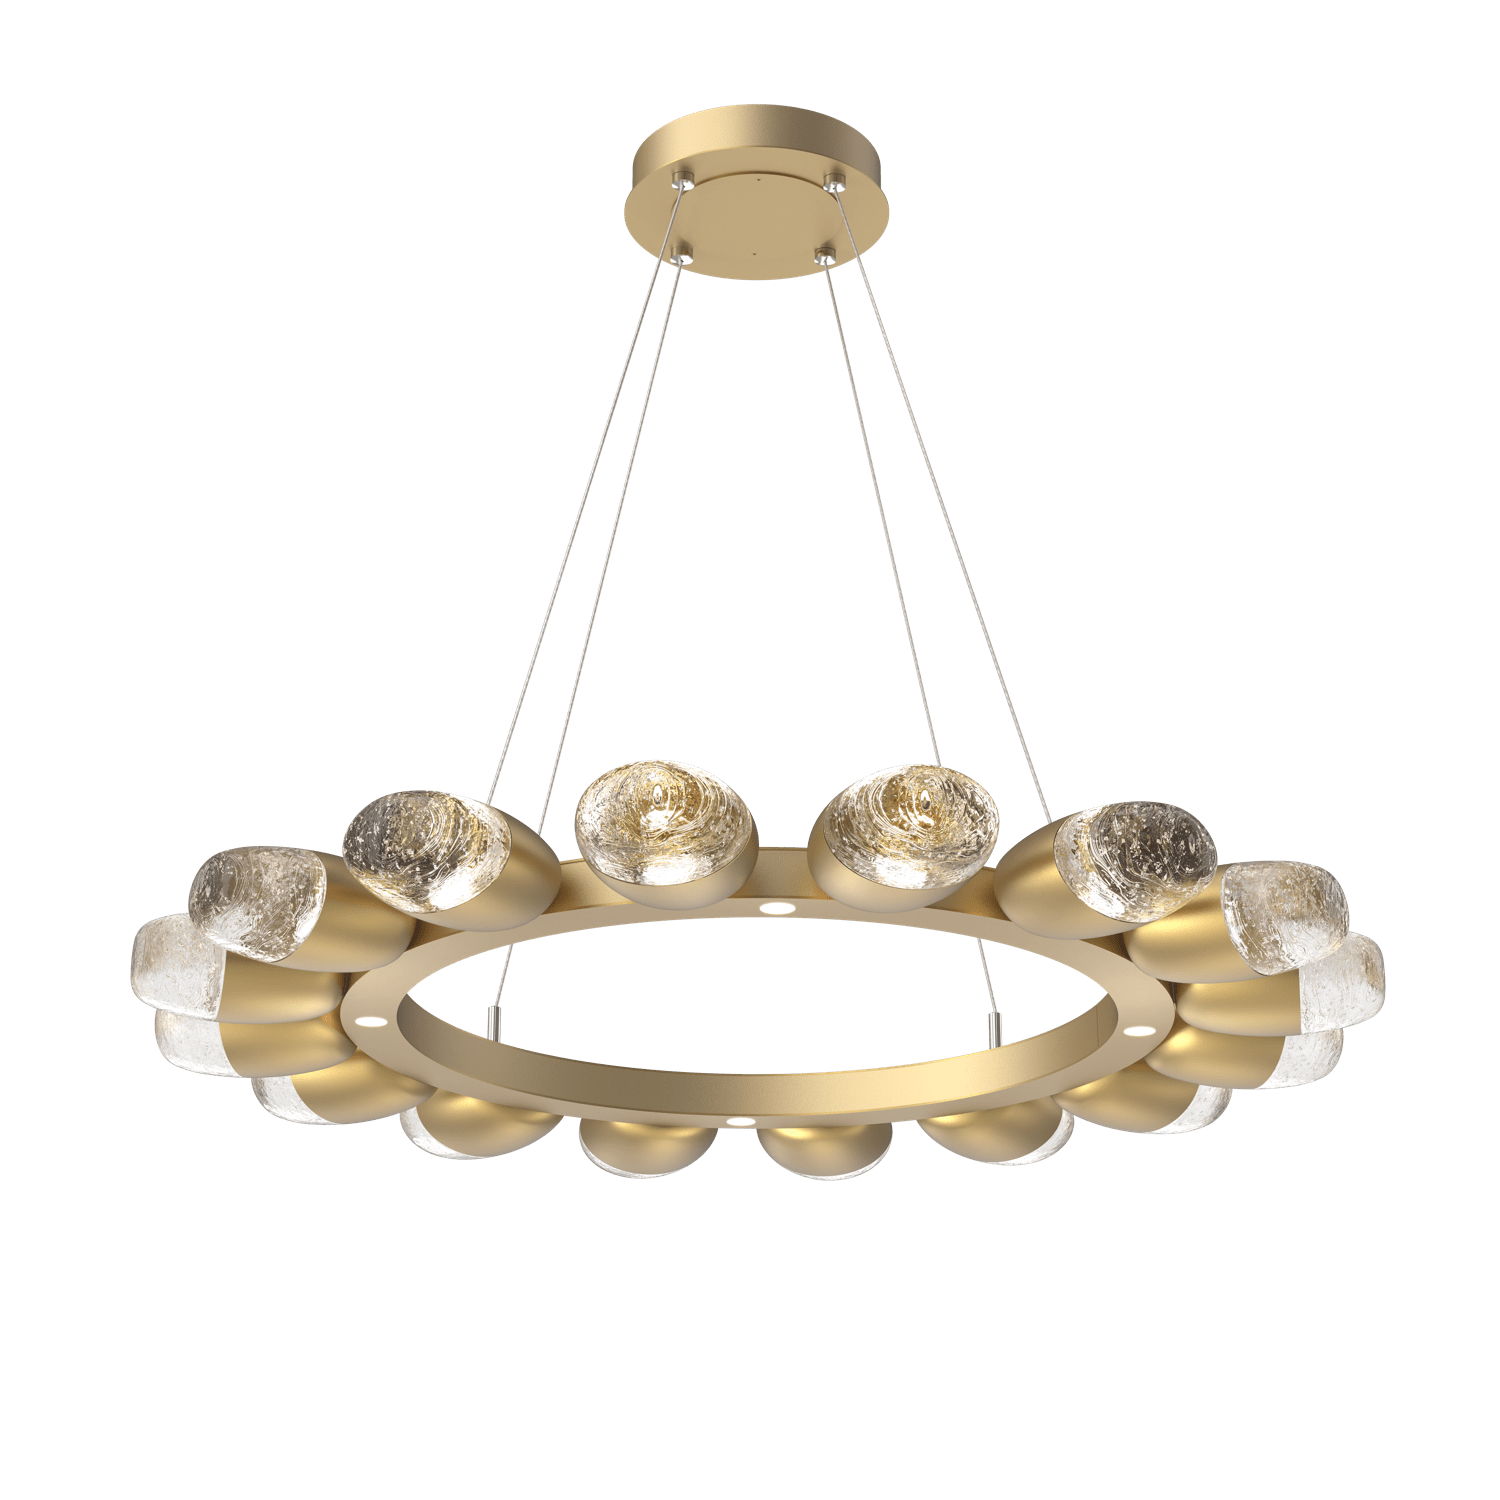 CHB0079-36-GB-Hammerton-Studio-Pebble-36-inch-radial-ring-chandelier-with-gilded-brass-finish-and-clear-cast-glass-shades-and-LED-lamping